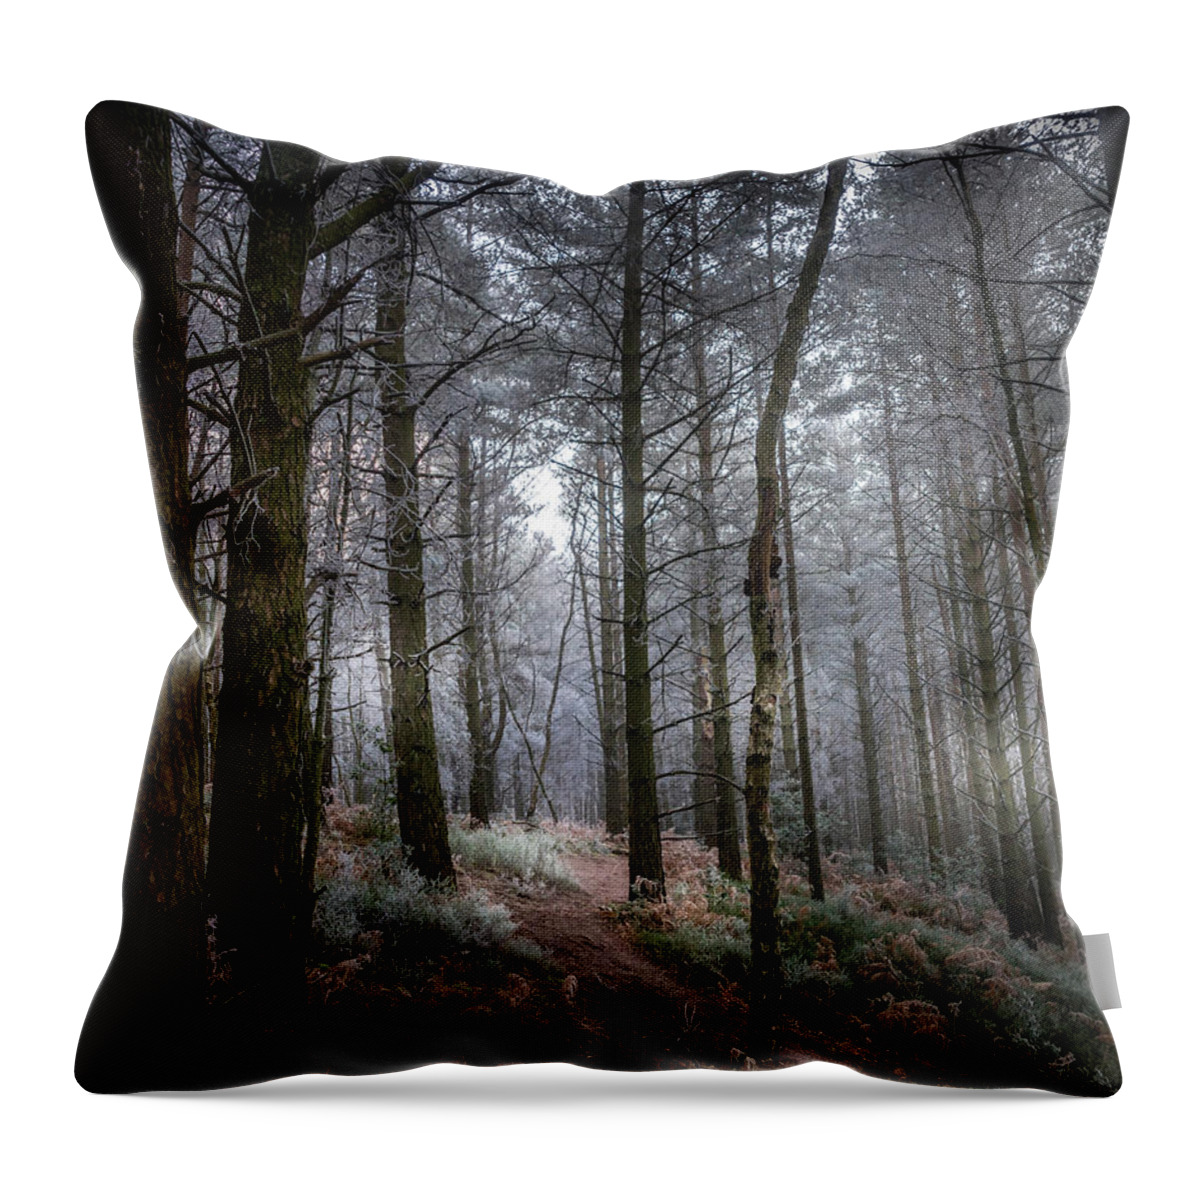 Woodland Throw Pillow featuring the photograph Woodland Light by Chris Boulton